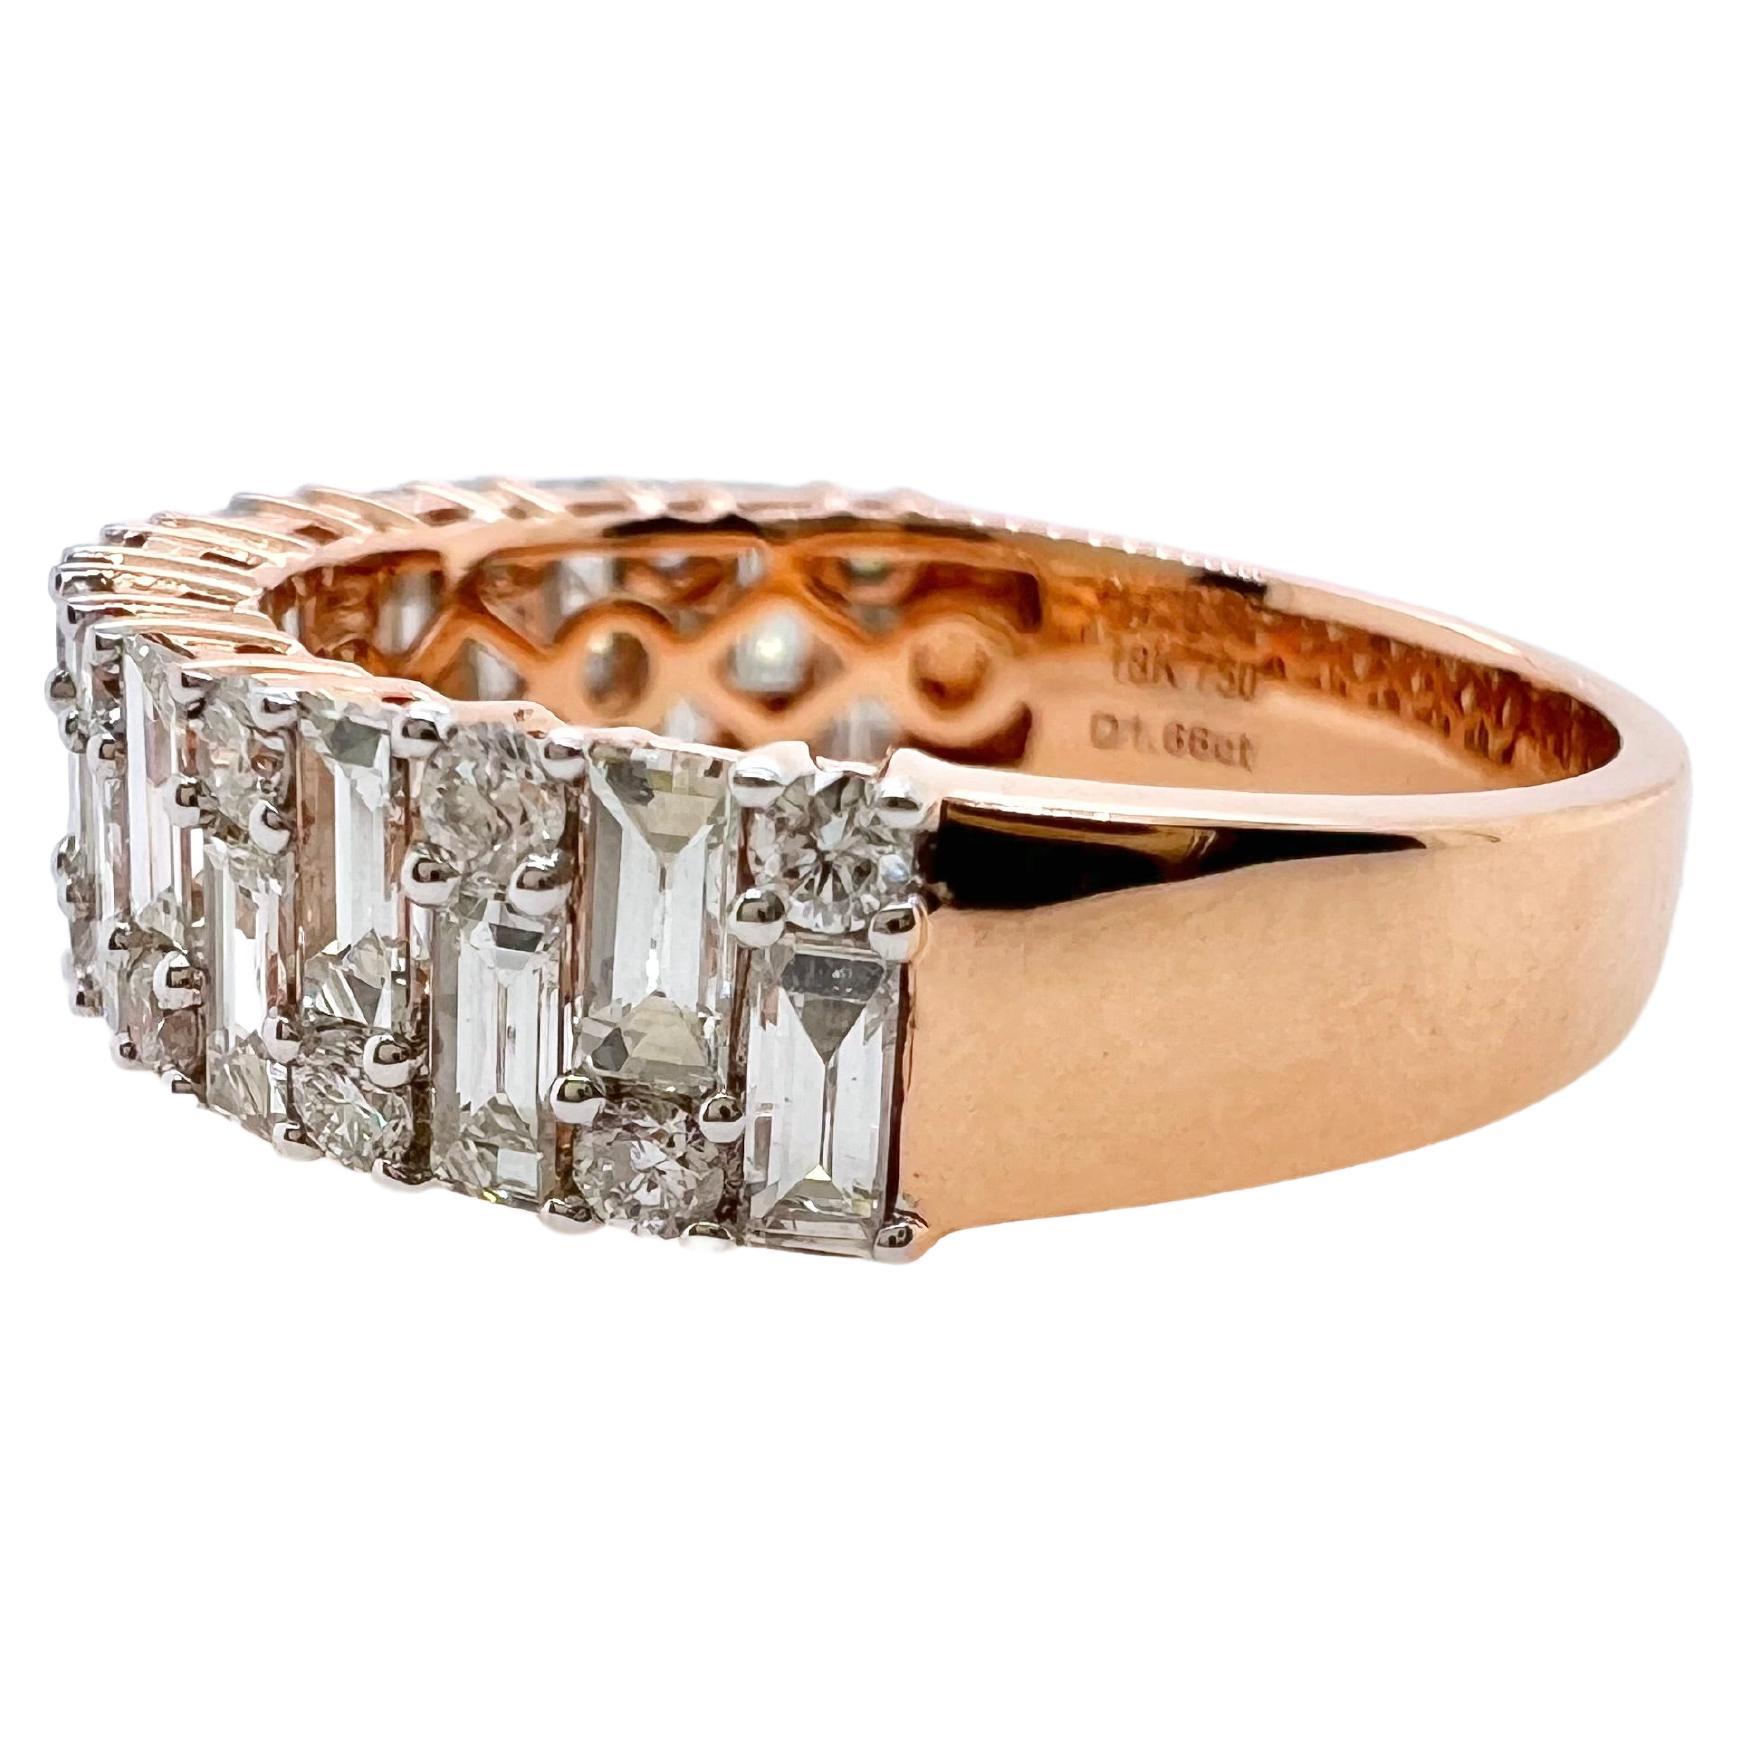 This diamond band has a classic feel, yet with a slight contemporary twist.  The round diamonds are strategically set
amongst the baguettes to give a unique pattern that is timeless.  The band is set in 18k rose gold to give a different
aesthetic